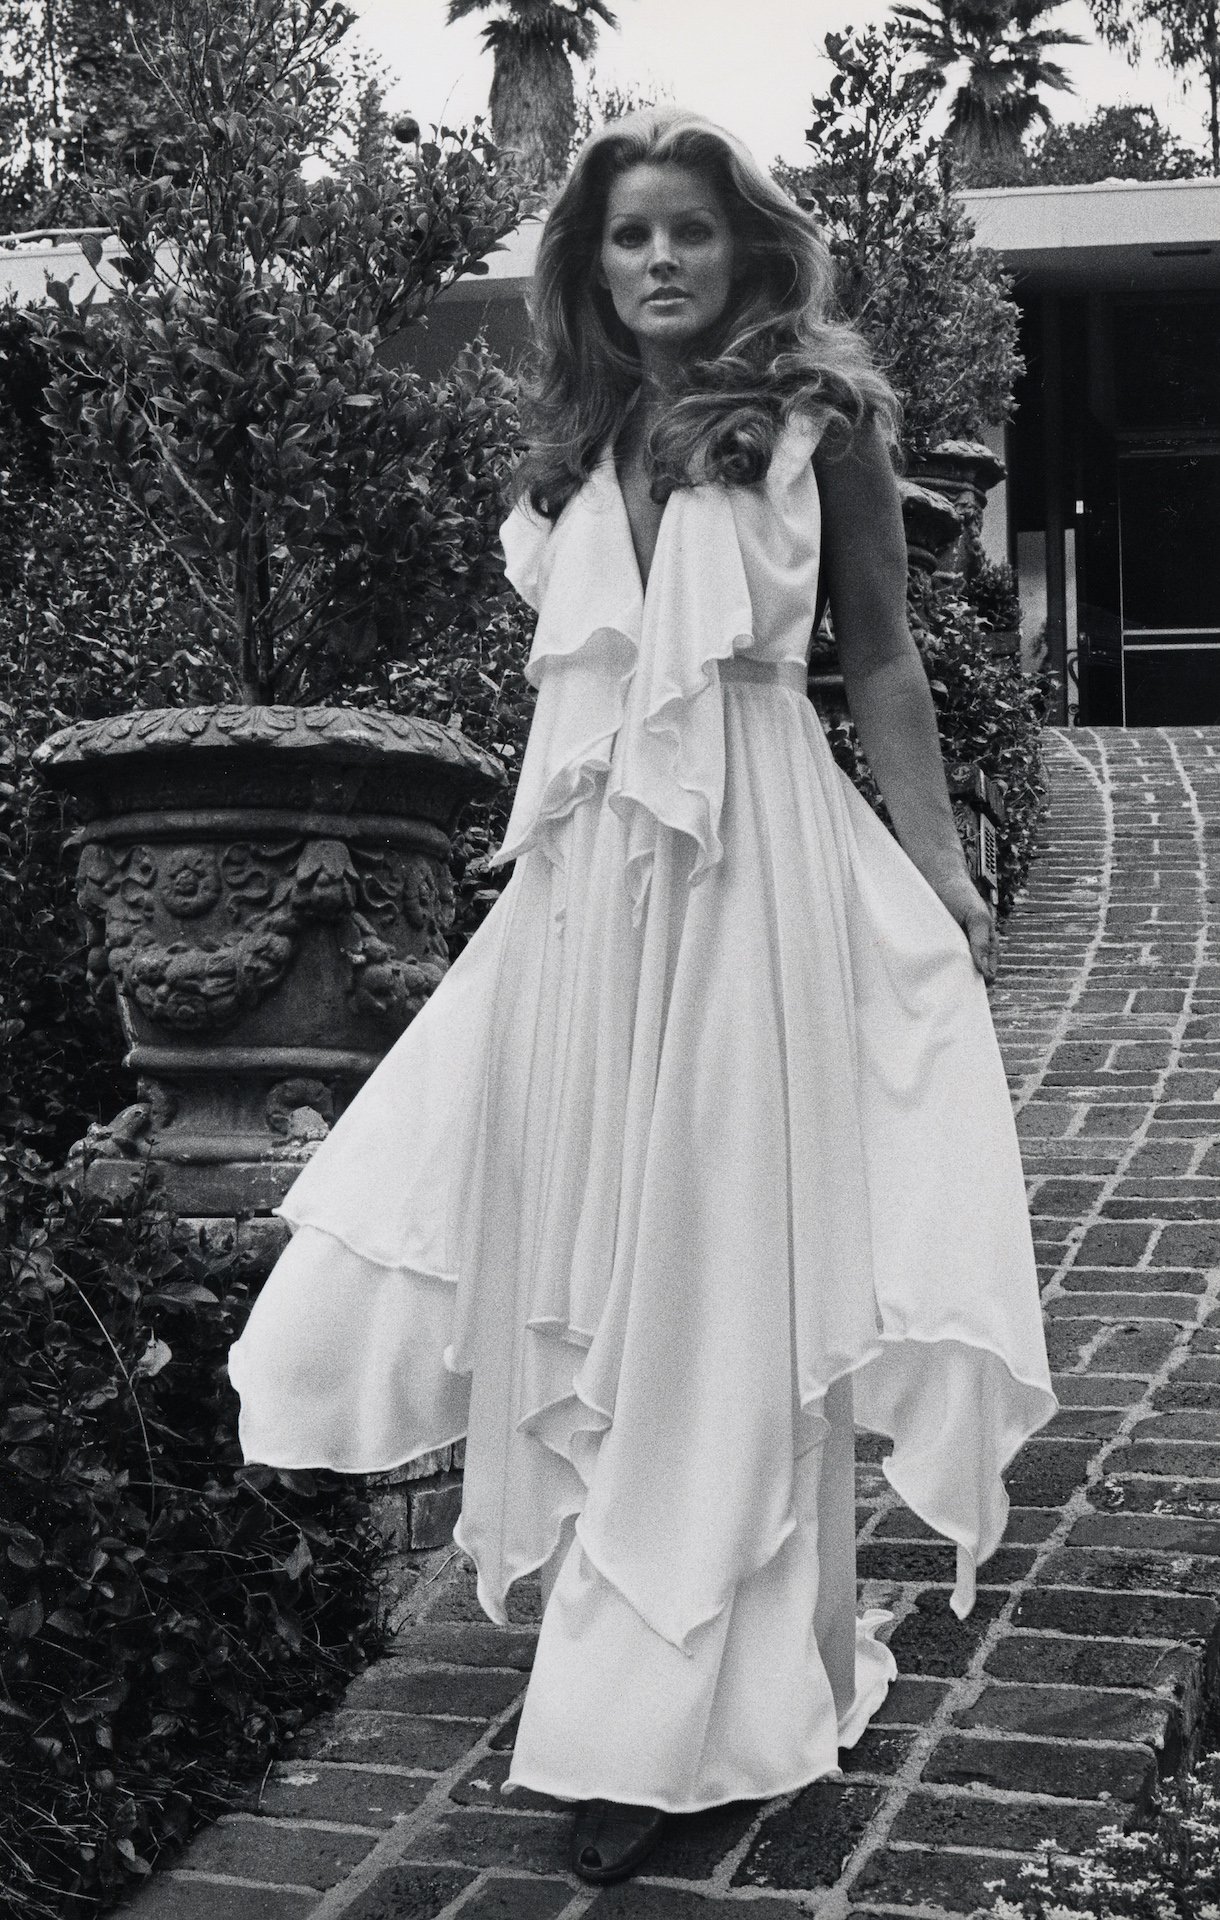 Exclusive Photo Shoot of Priscilla Presley at her Beverly Hills Home - April 9, 1975